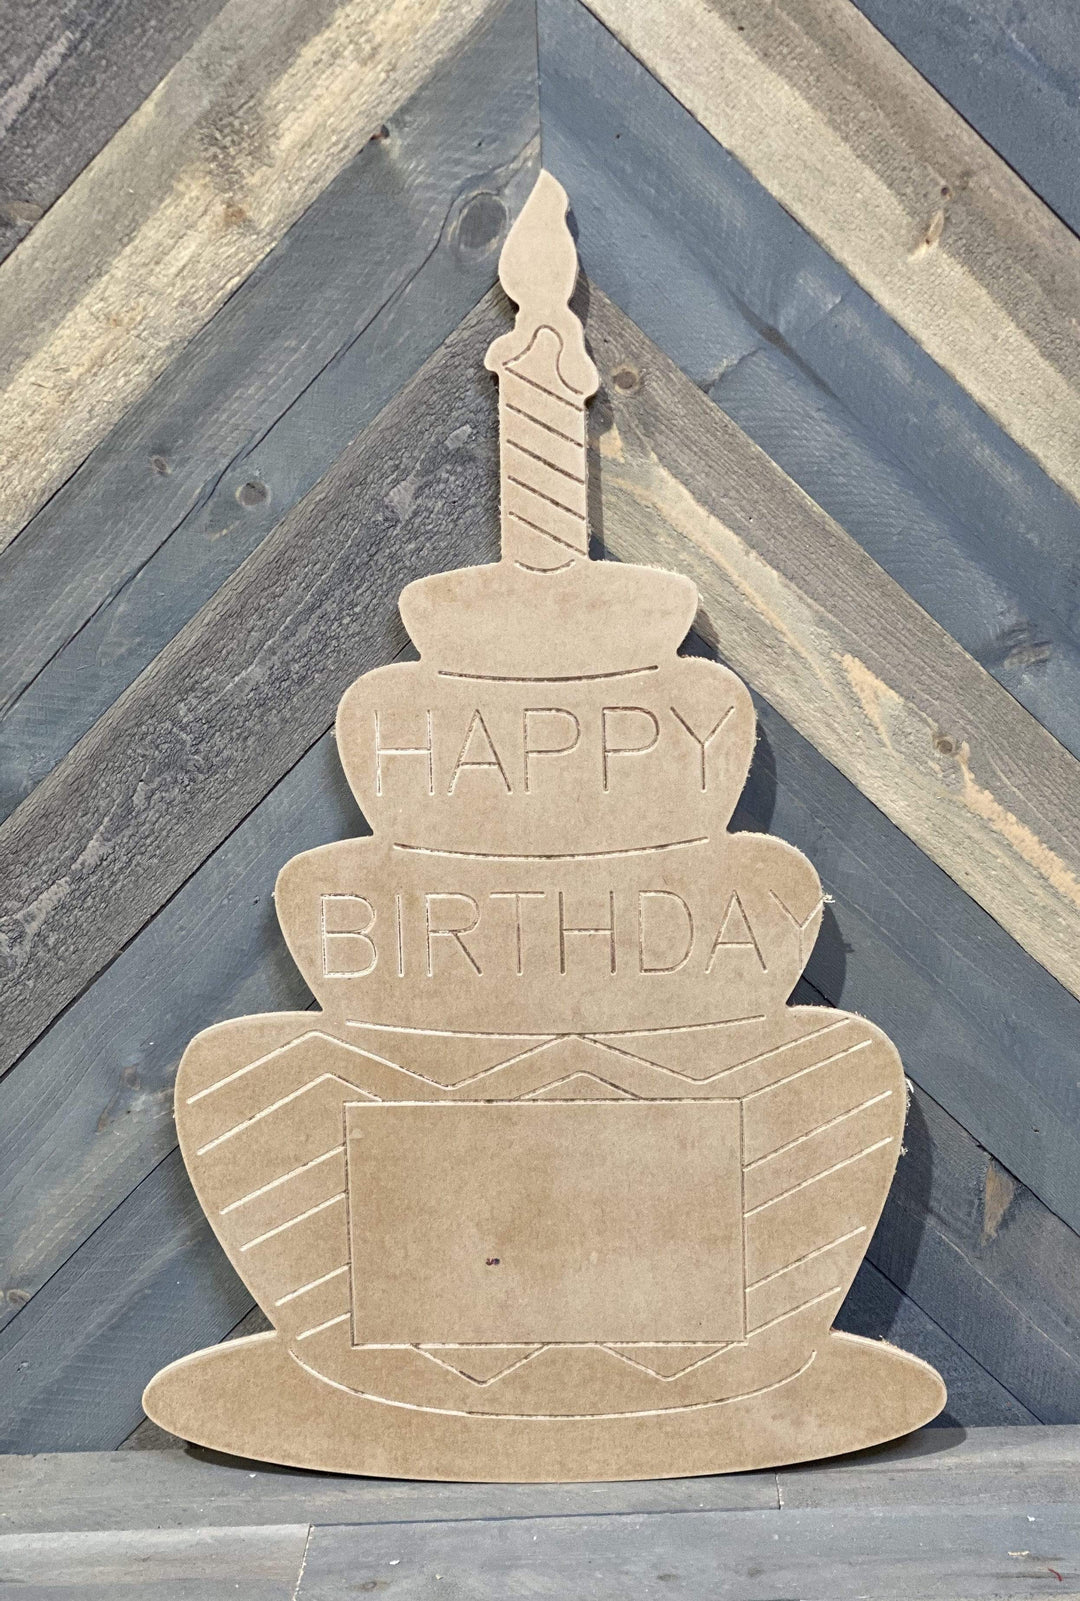 Birthday Cake  Door Hanger blank cut out ready to be painted by you!